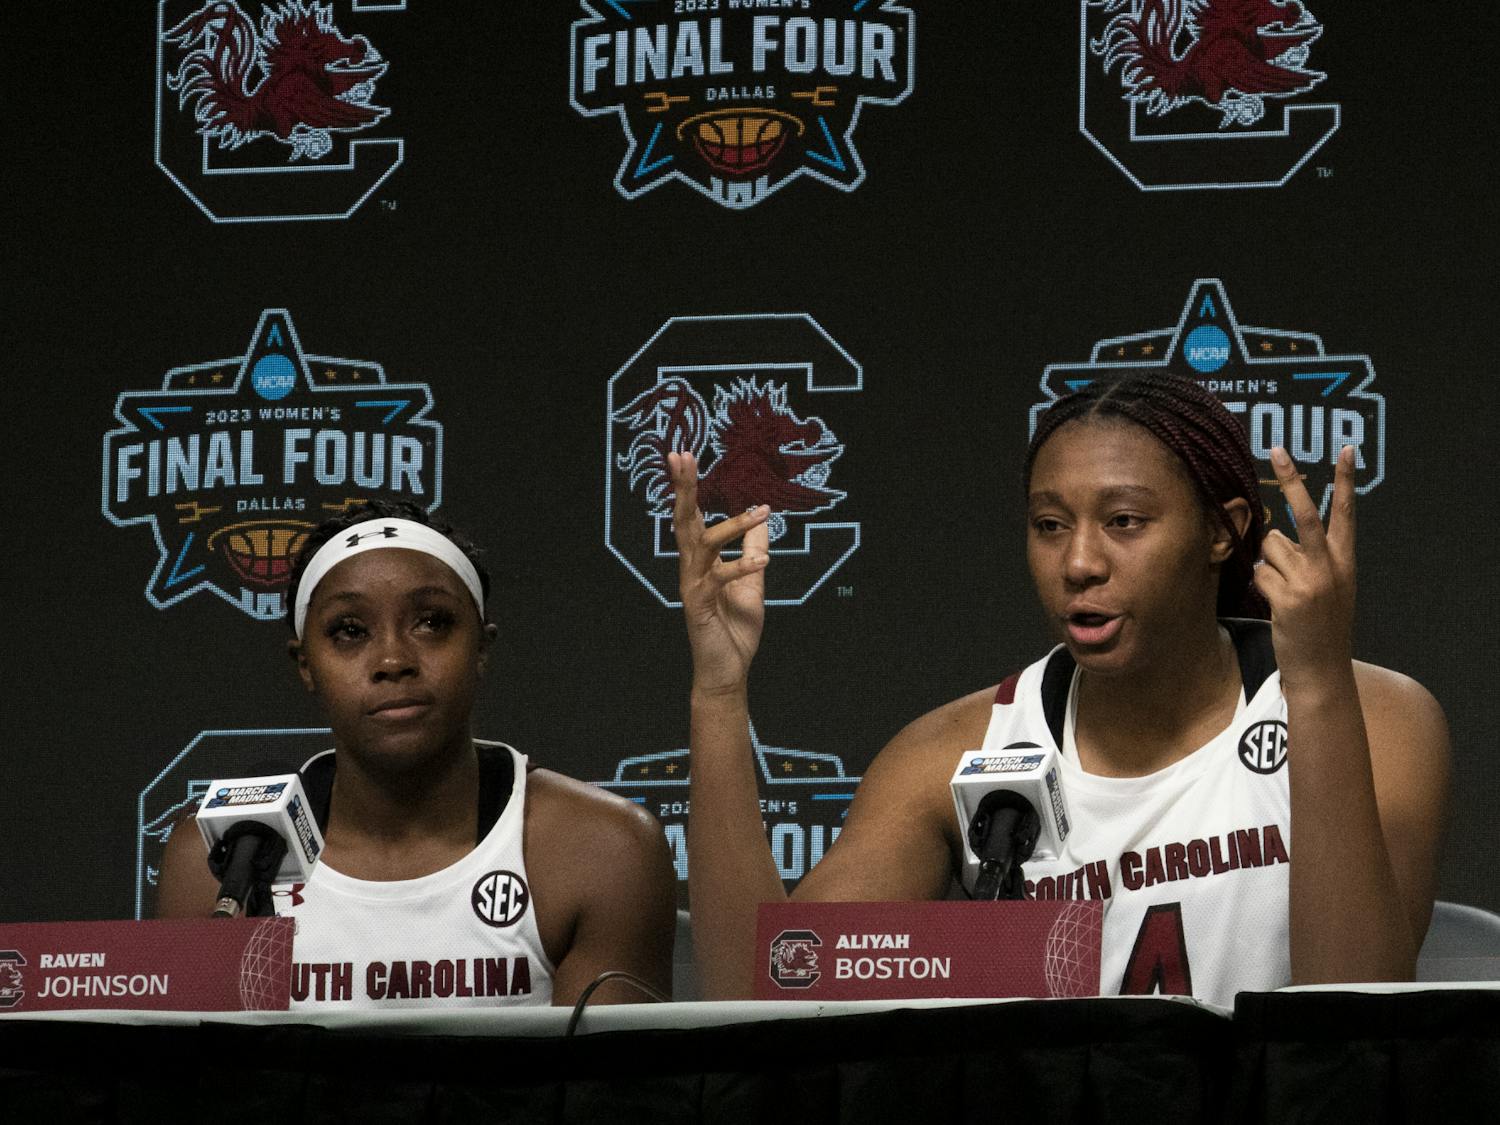 Boston and Johnson share their post-game thoughts about the Women’s Final Four match on March 31, 2023. The Gamecocks lost to the Hawkeyes 77-73, ending its historic 42-game winning streak. 